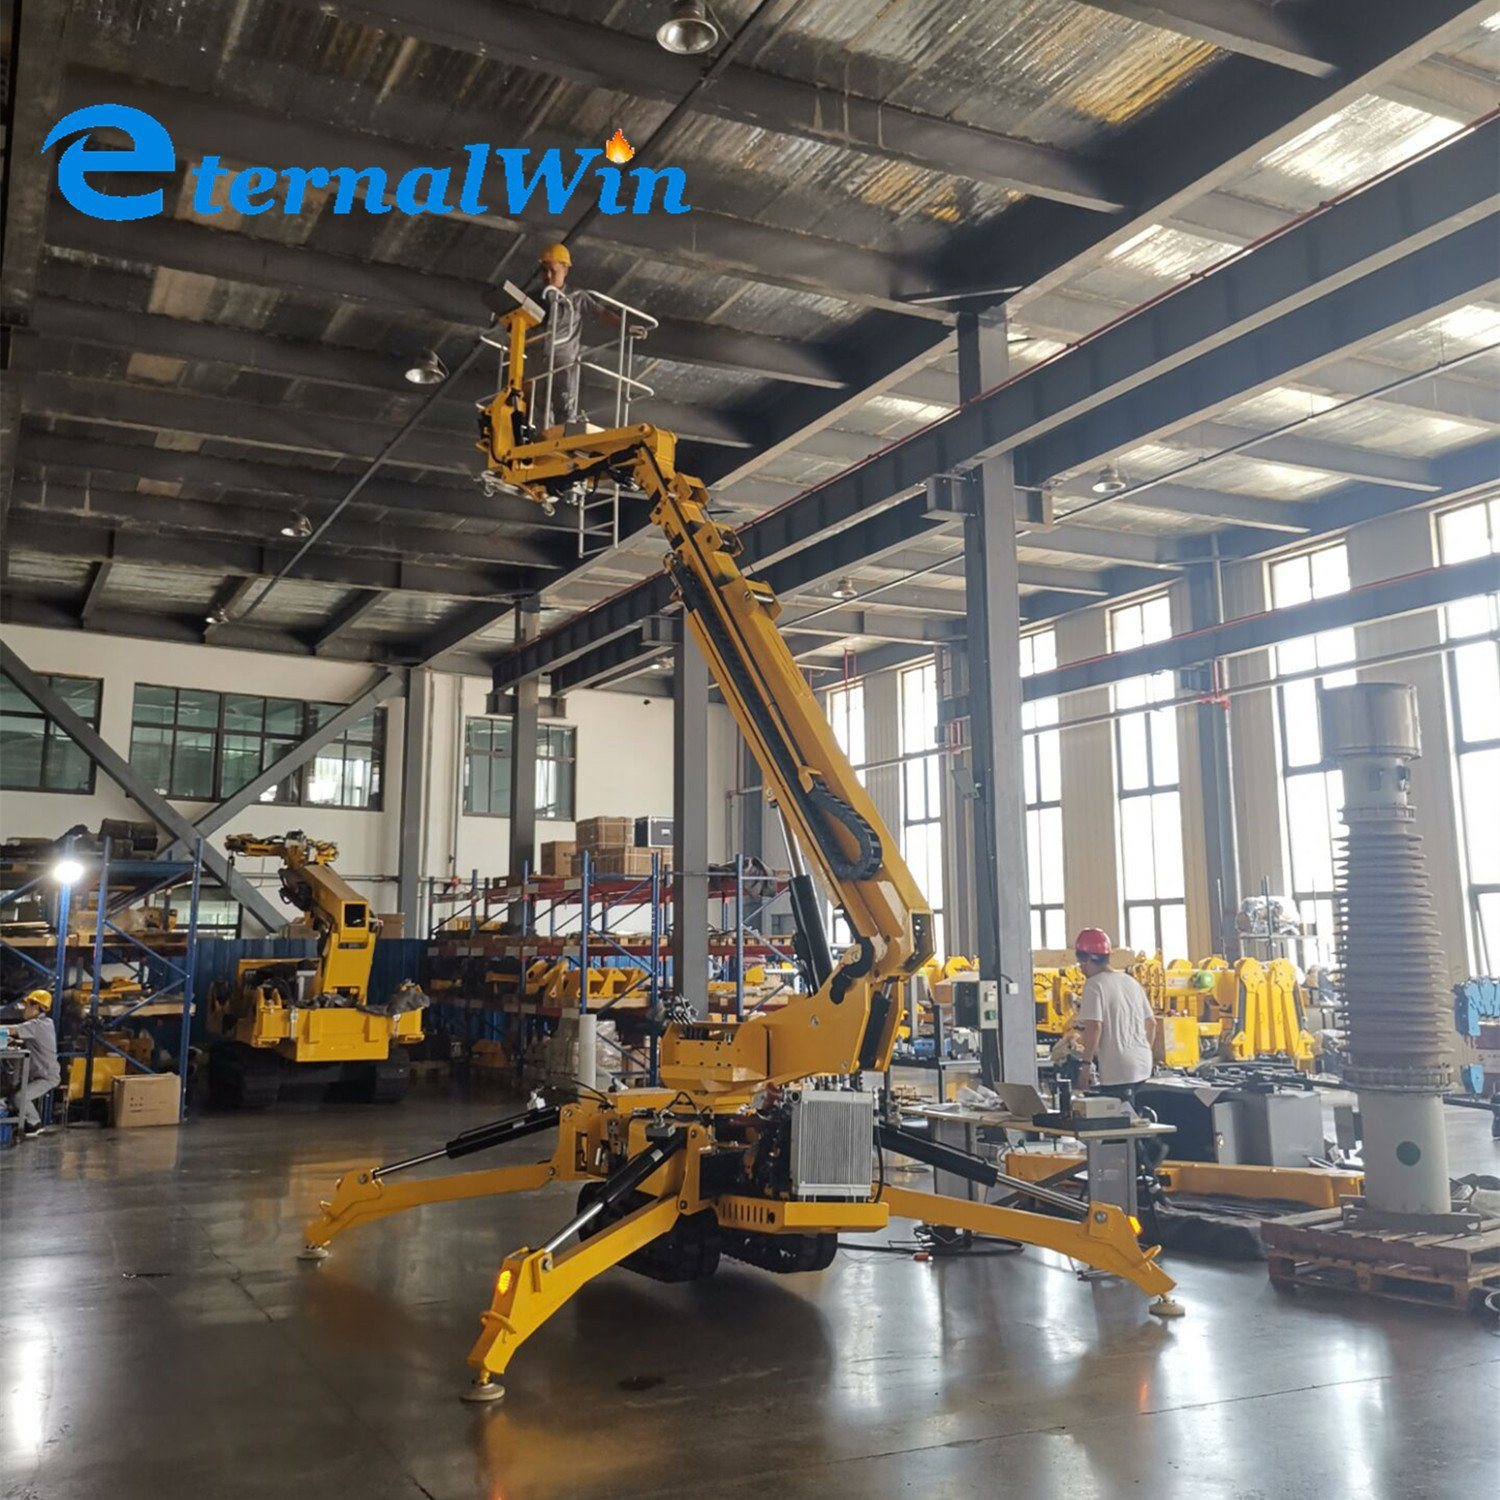 Professional Narrow Working 12ton 22m Lifting Height Spider Crane with Basket & Jib